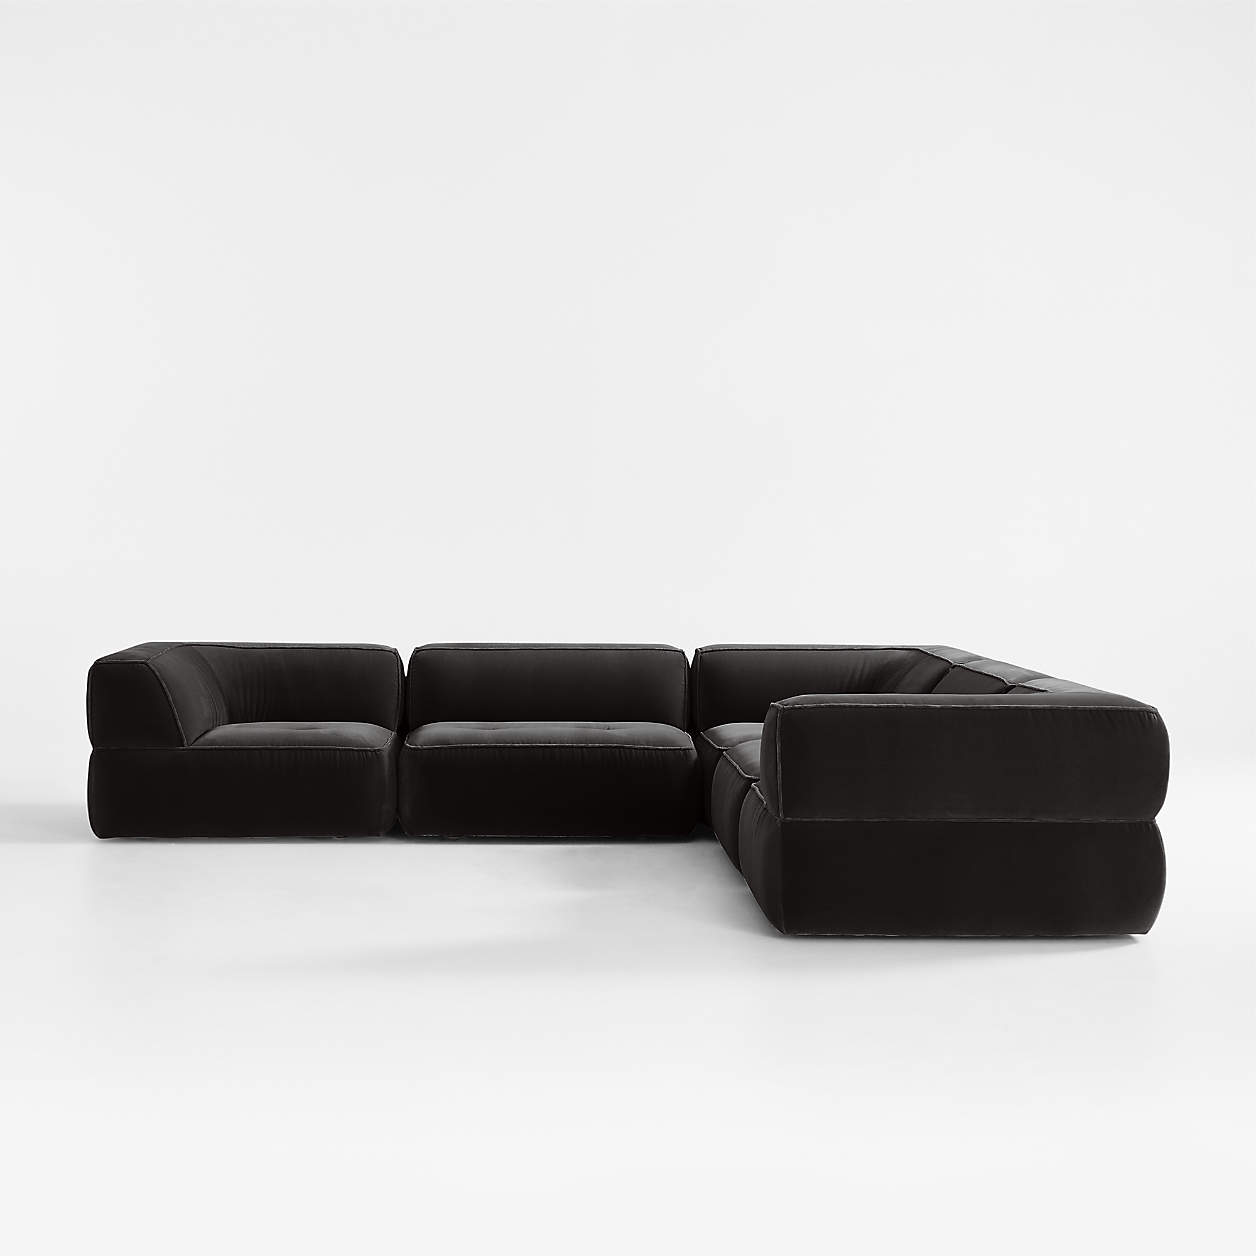 Day furniture – 3 piece sectional sofa